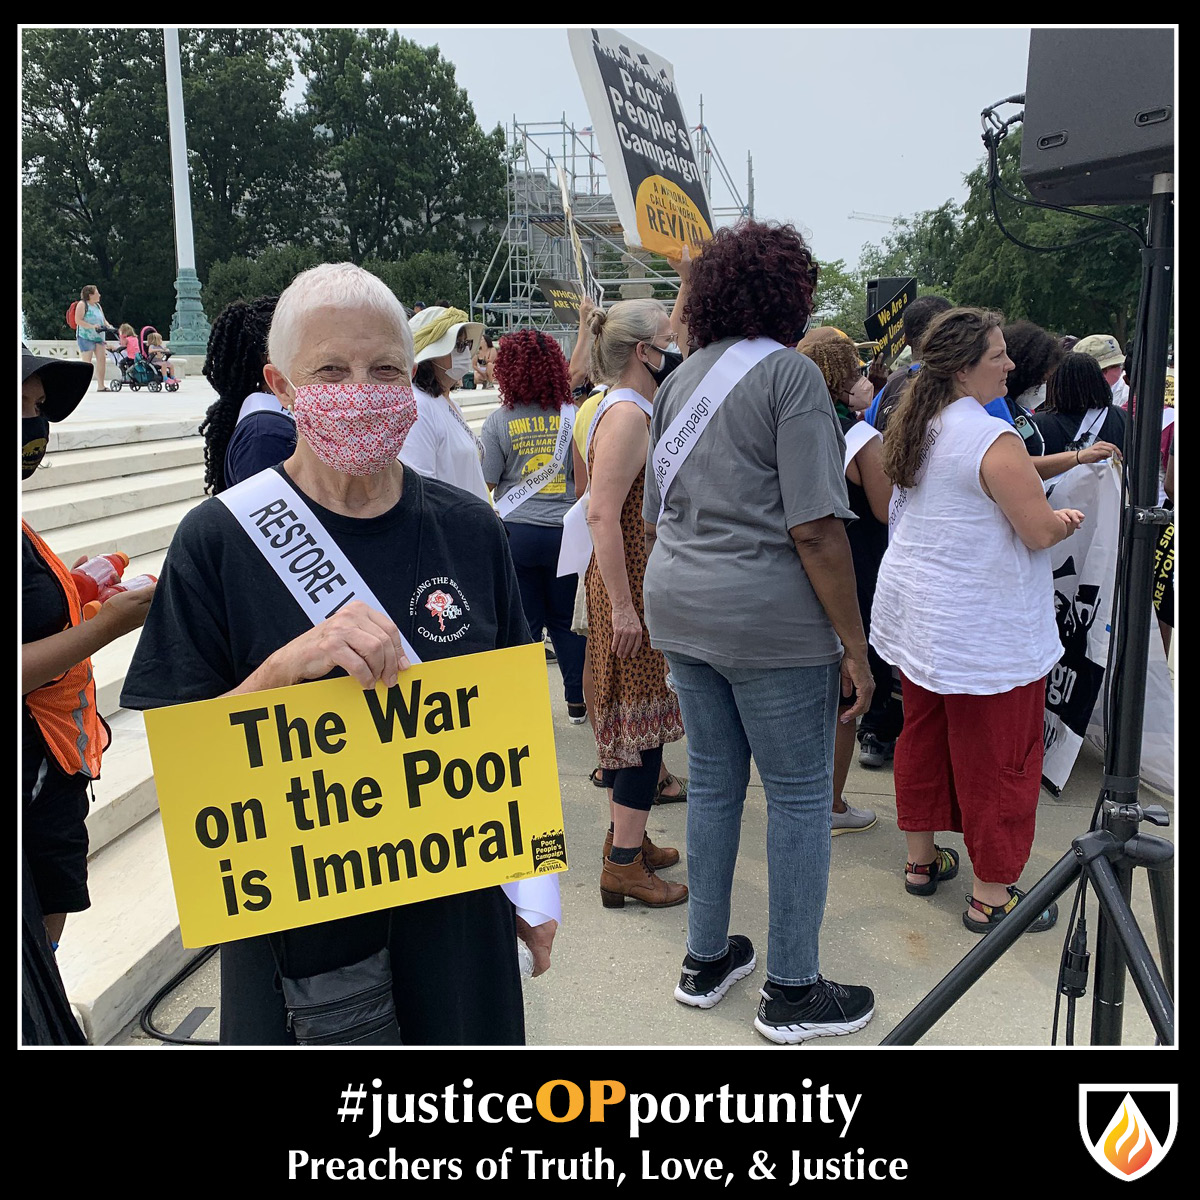 #justiceOpportunity Thursday—July 29, 2021